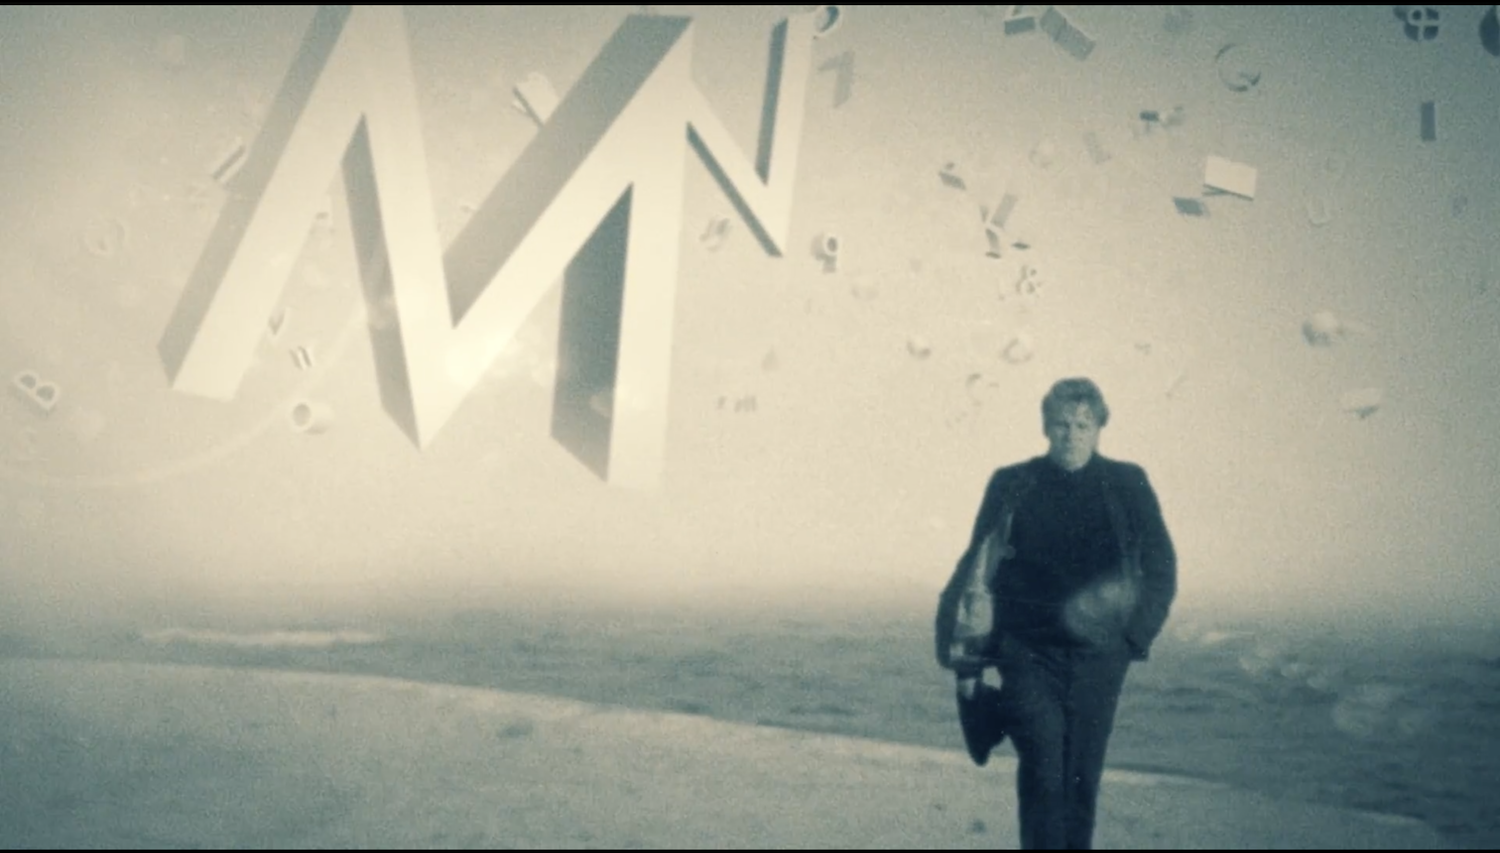 screen capture from "The Complete Works" by Justin Stephenson depicting bpNichol walking on a beach with three dimensional letter floating in the sky around him.